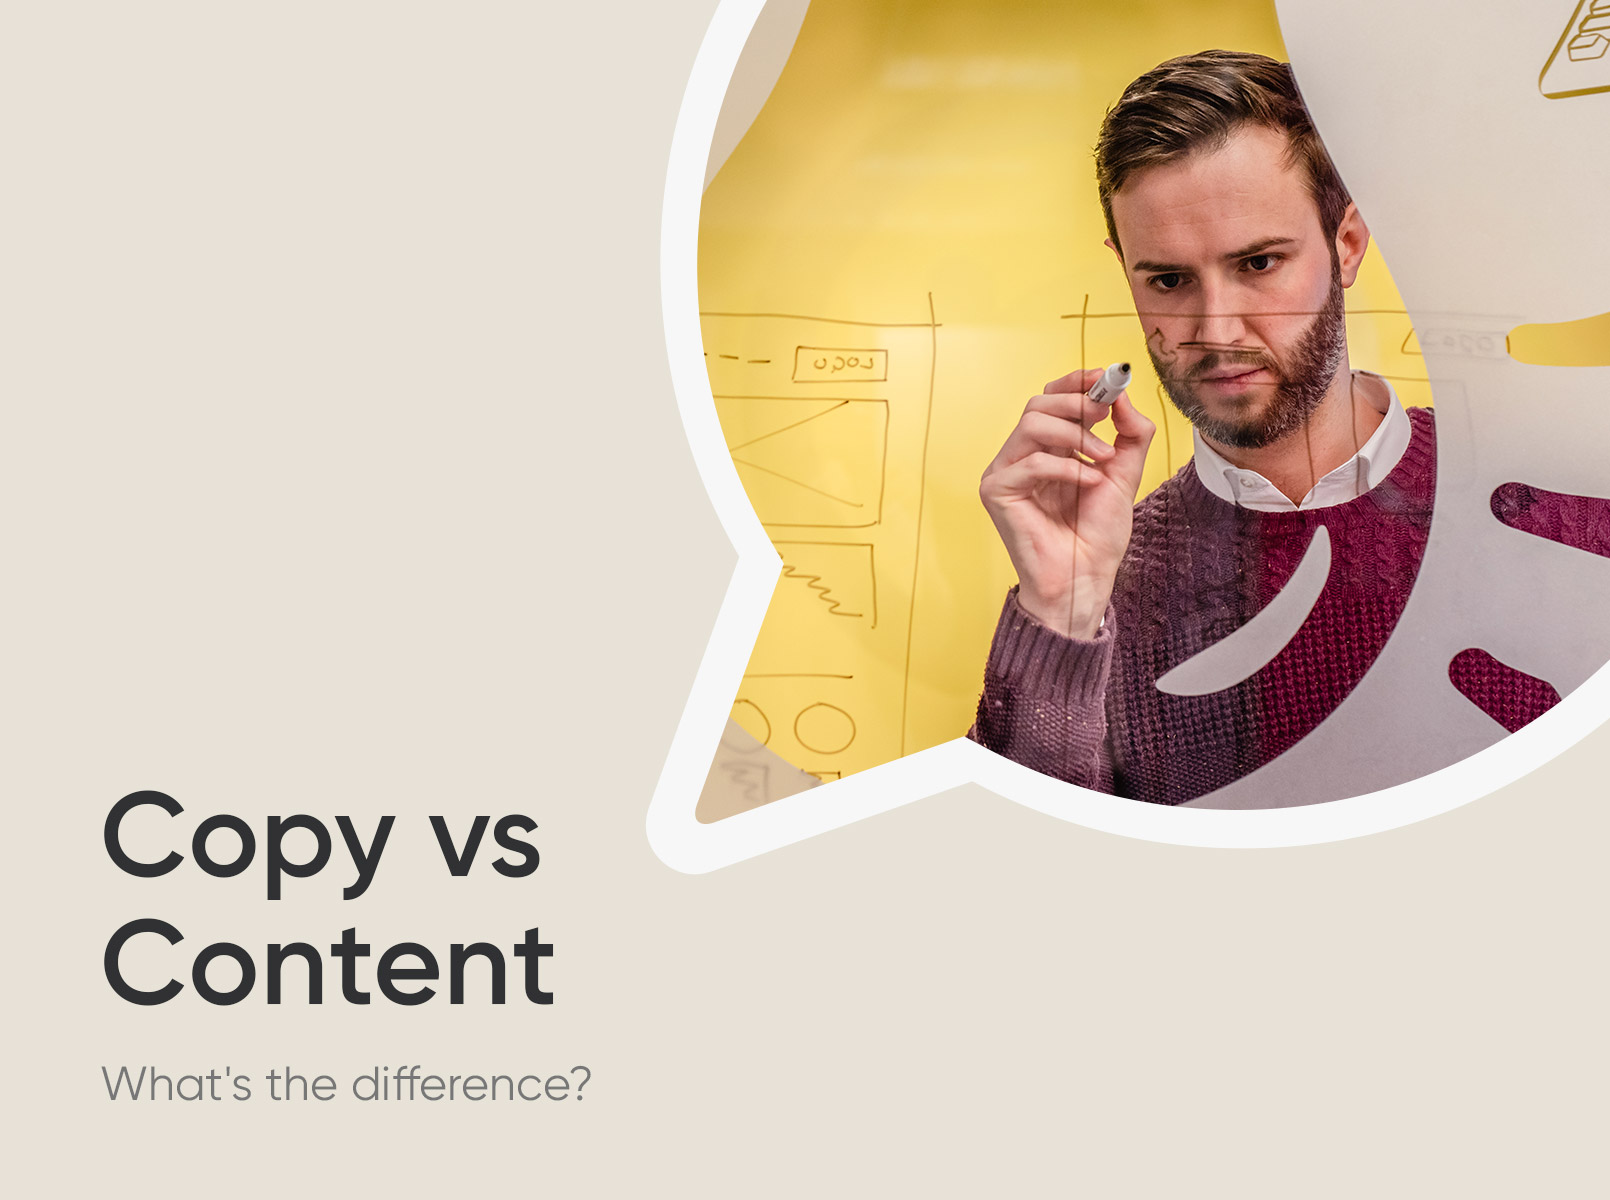 Copy vs Content: What’s the difference?